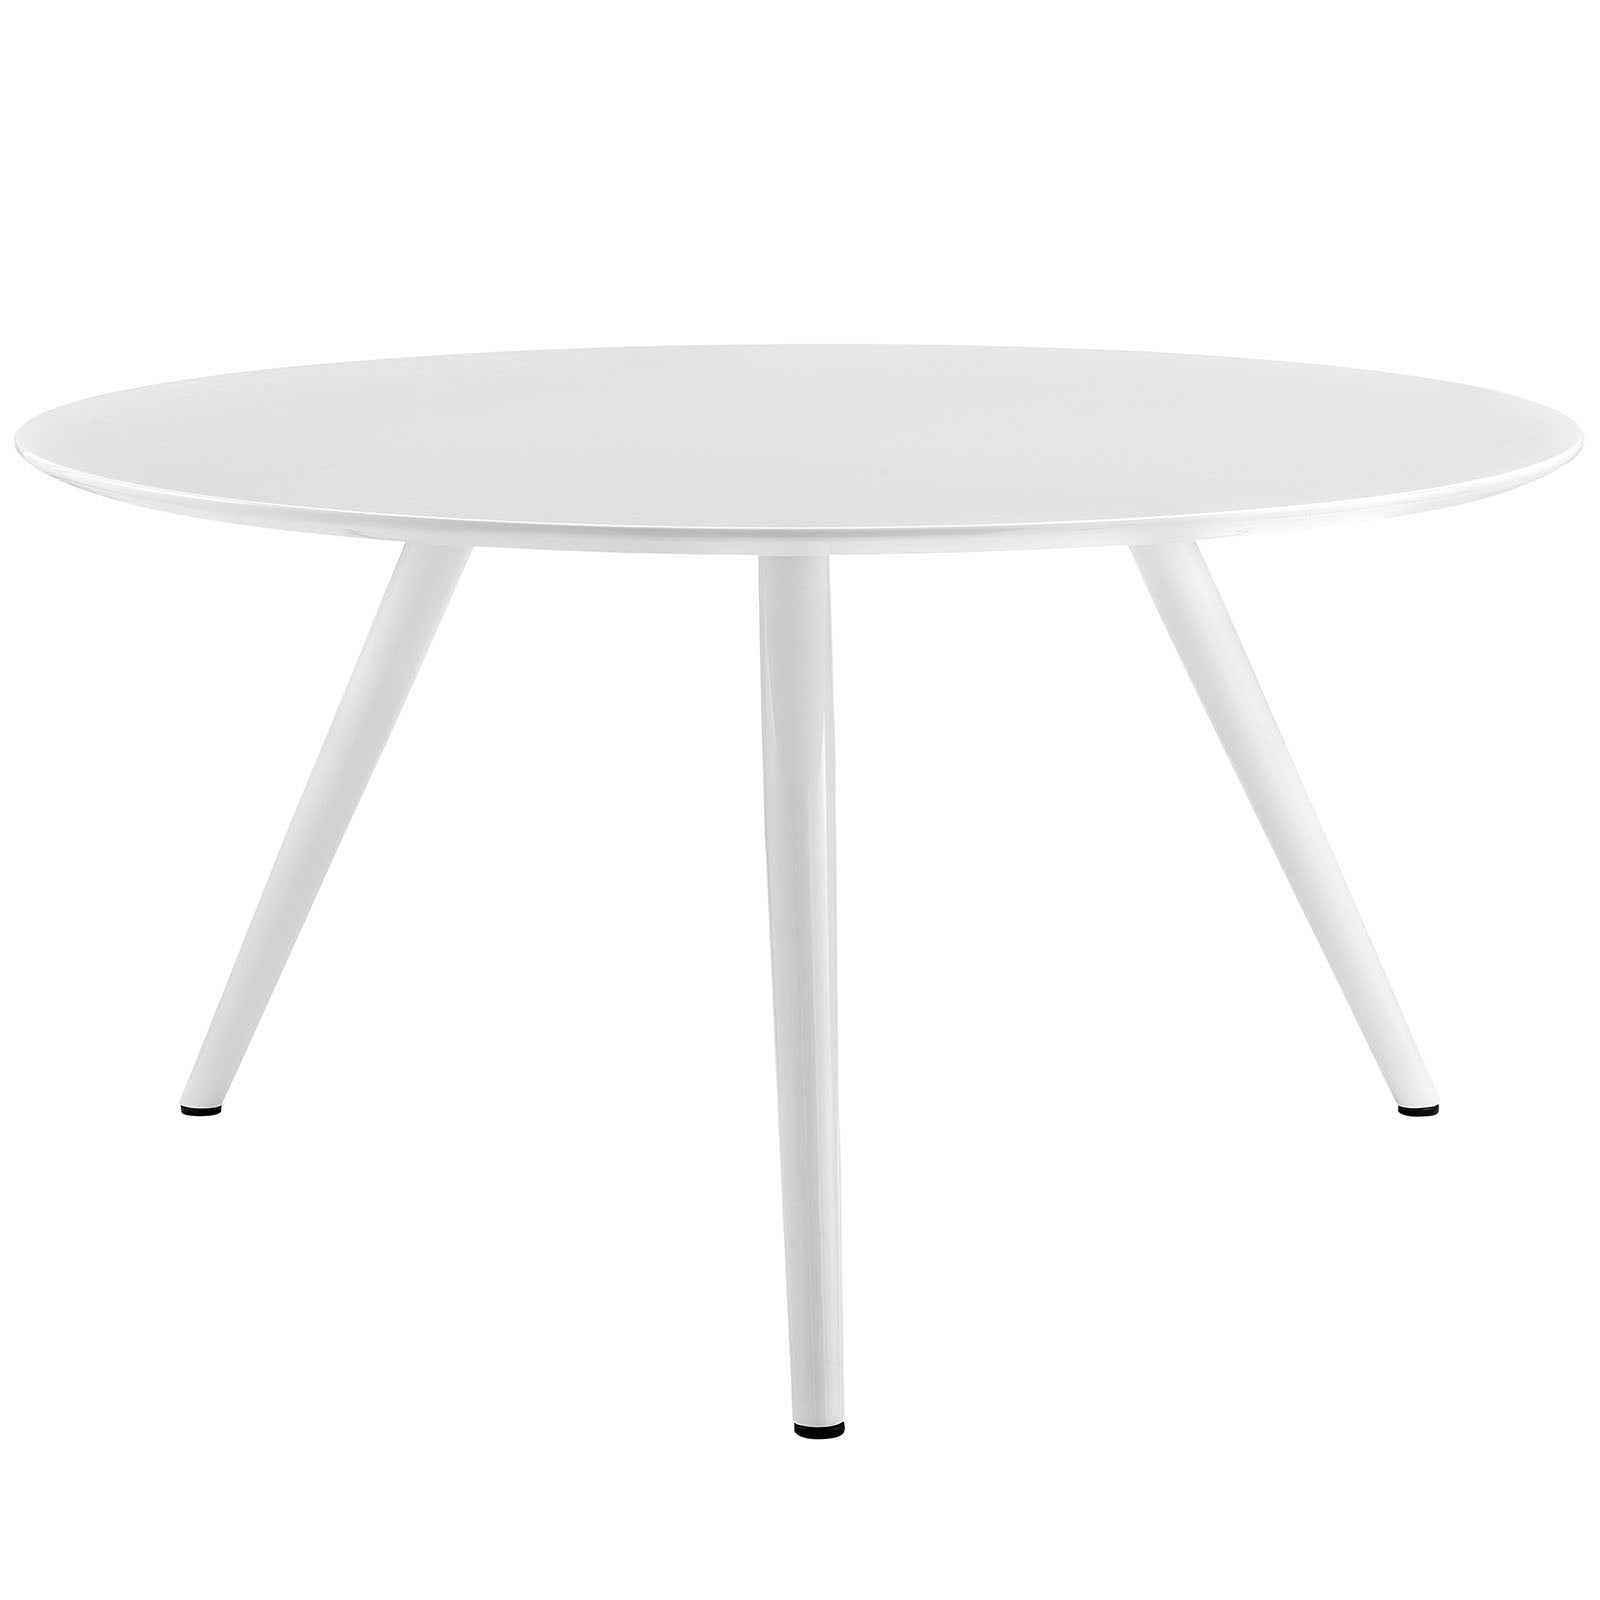 Lippa 54" Round Wood Top Dining Table with Tripod Base - East Shore Modern Home Furnishings